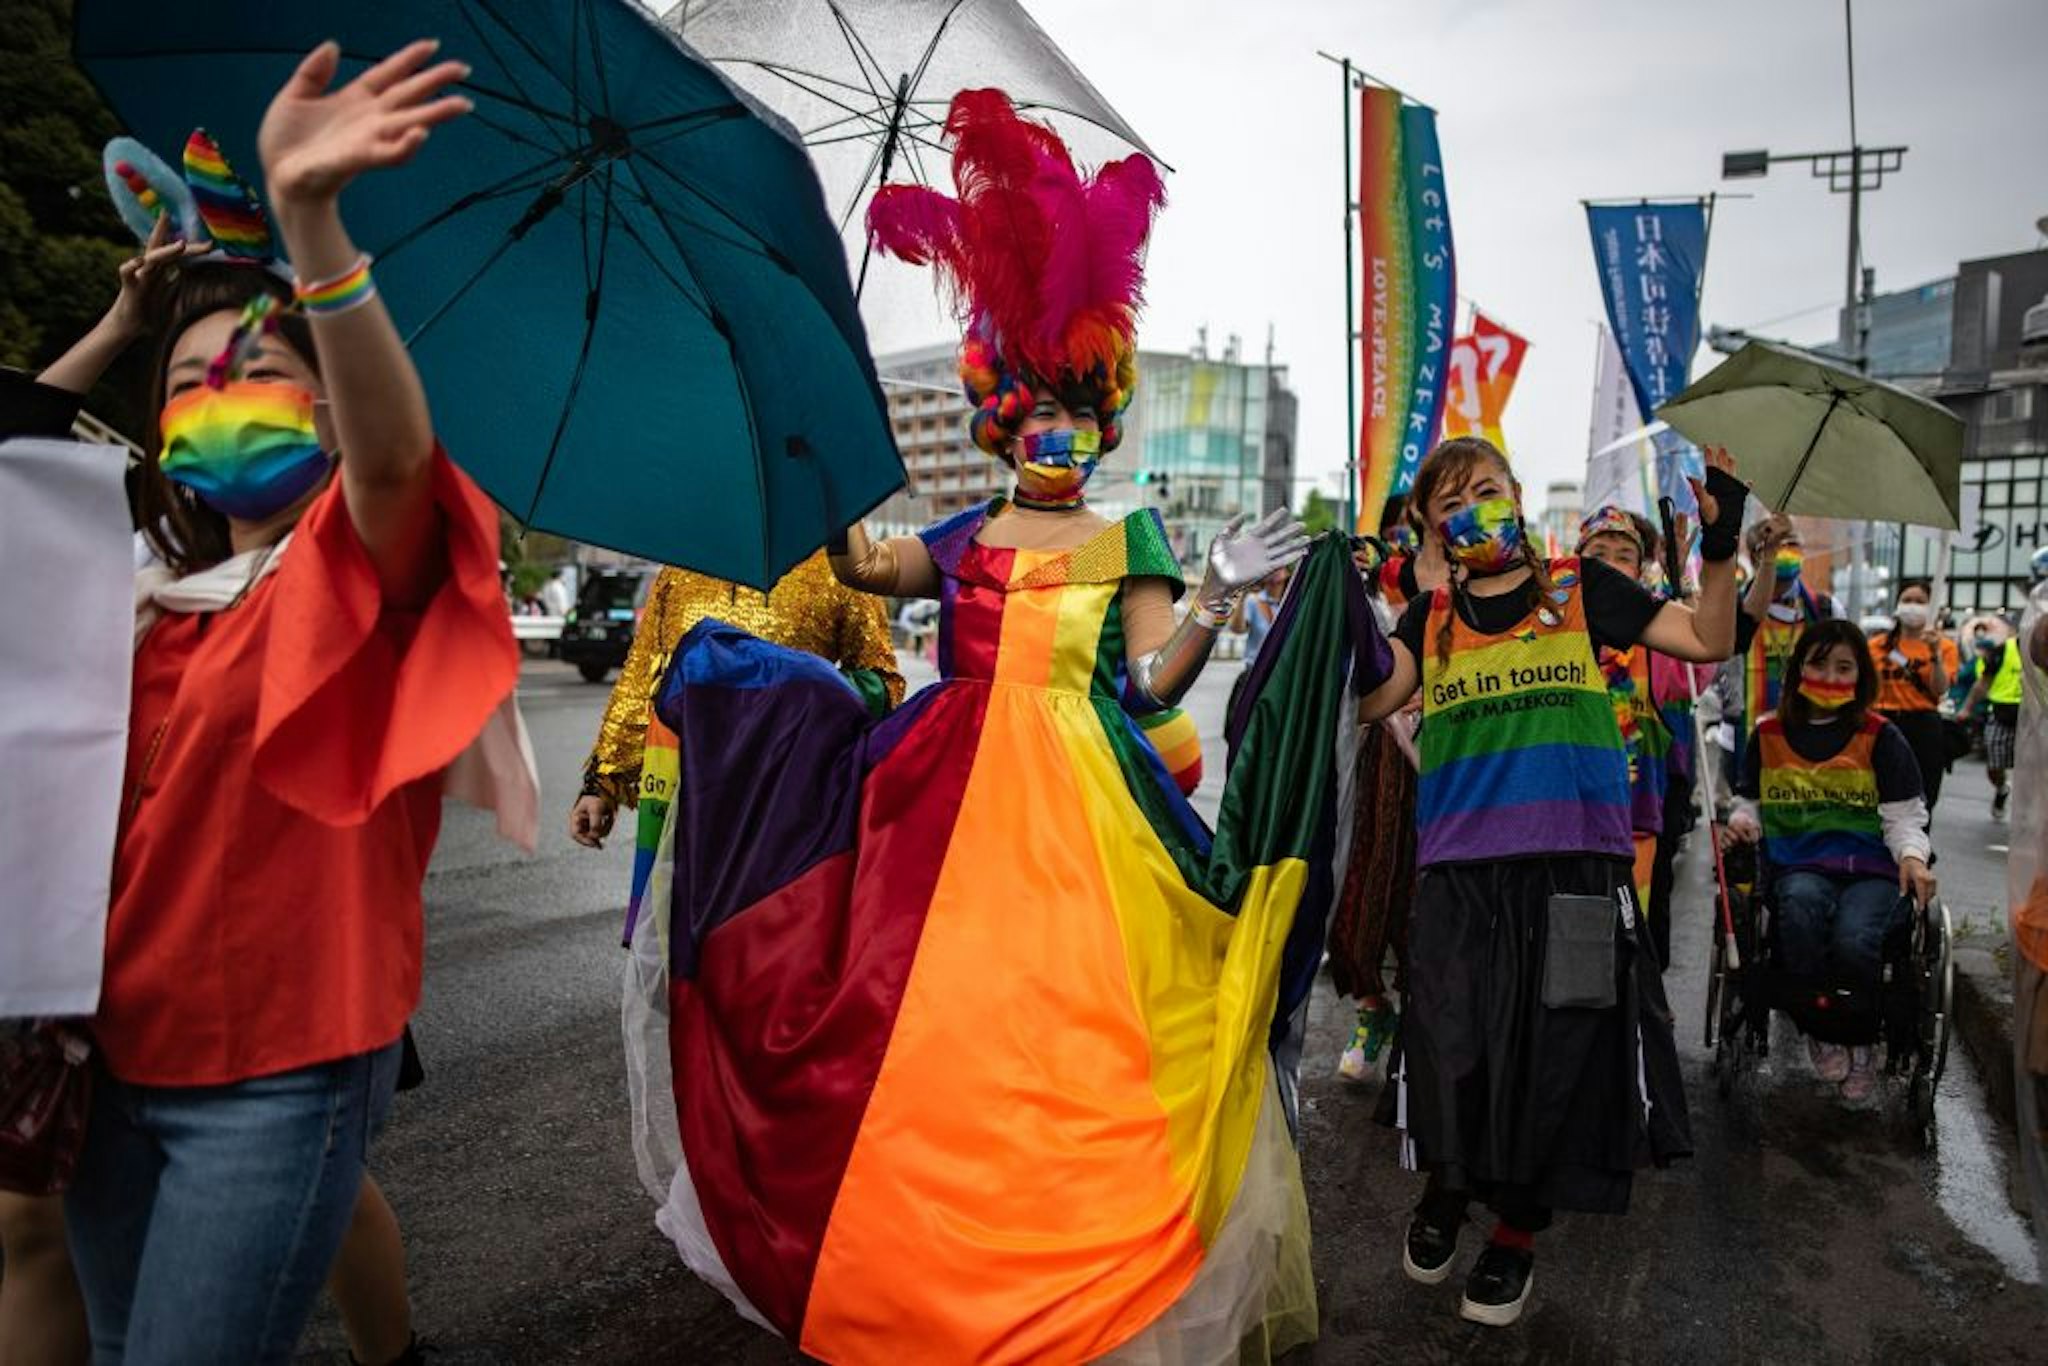 People attend the Tokyo Rainbow Pride 2022 Parade in Tokyo on April 24, 2022, to show support for members of the LGBT community. - -- IMAGE RESTRICTED TO EDITORIAL USE -- (Photo by Philip FONG / AFP) / -- IMAGE RESTRICTED TO EDITORIAL USE -- (Photo by PHILIP FONG/AFP via Getty Images)